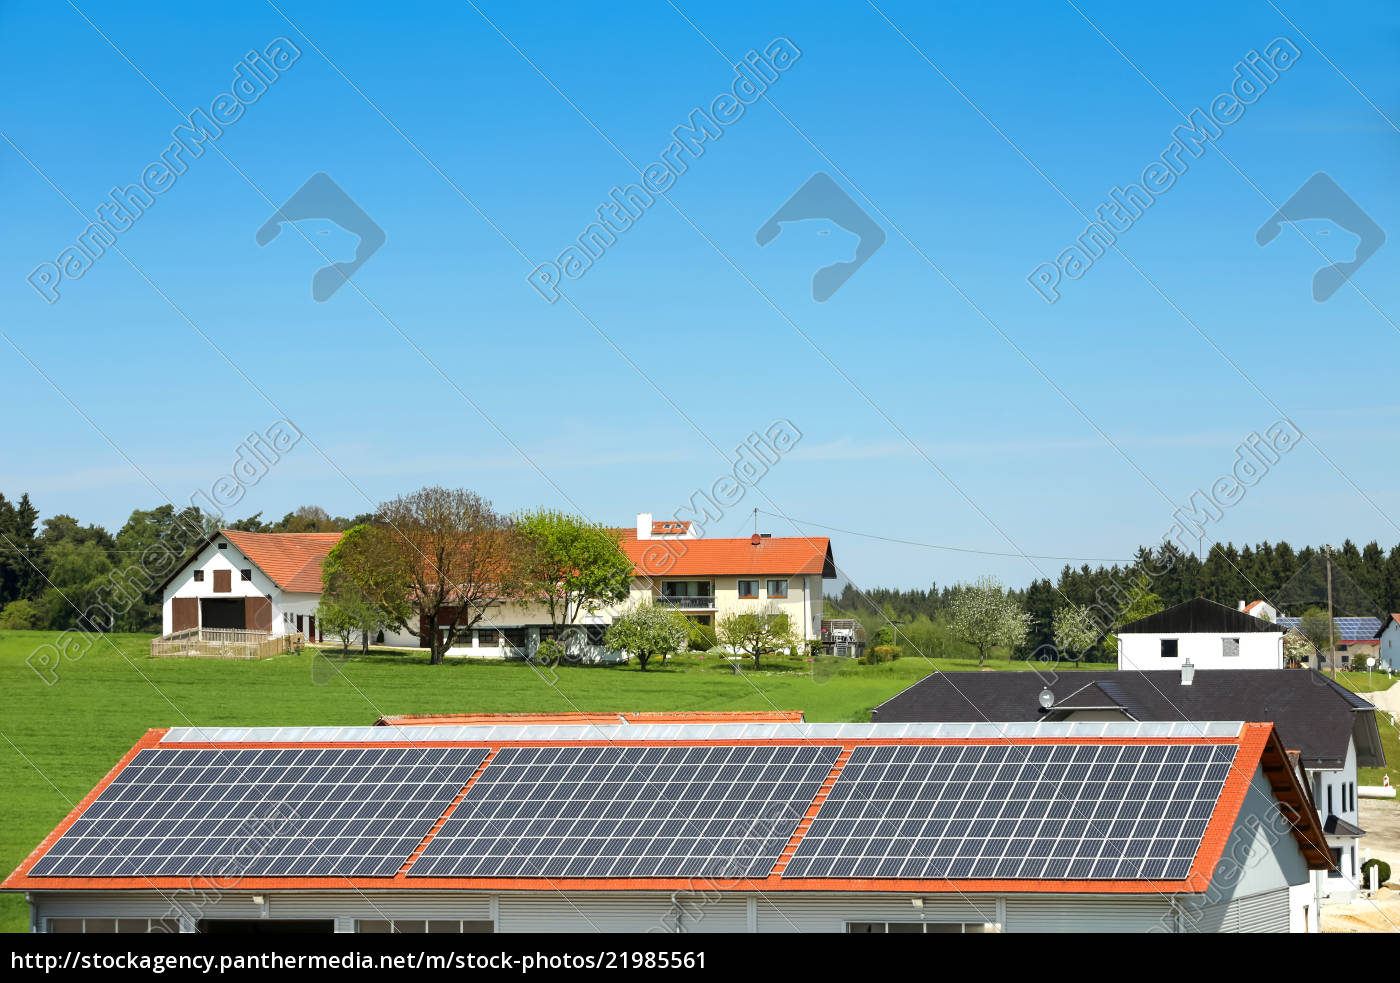 Solar panels in Germany rightsmanaged image 21985561 PantherMedia Stock Agency